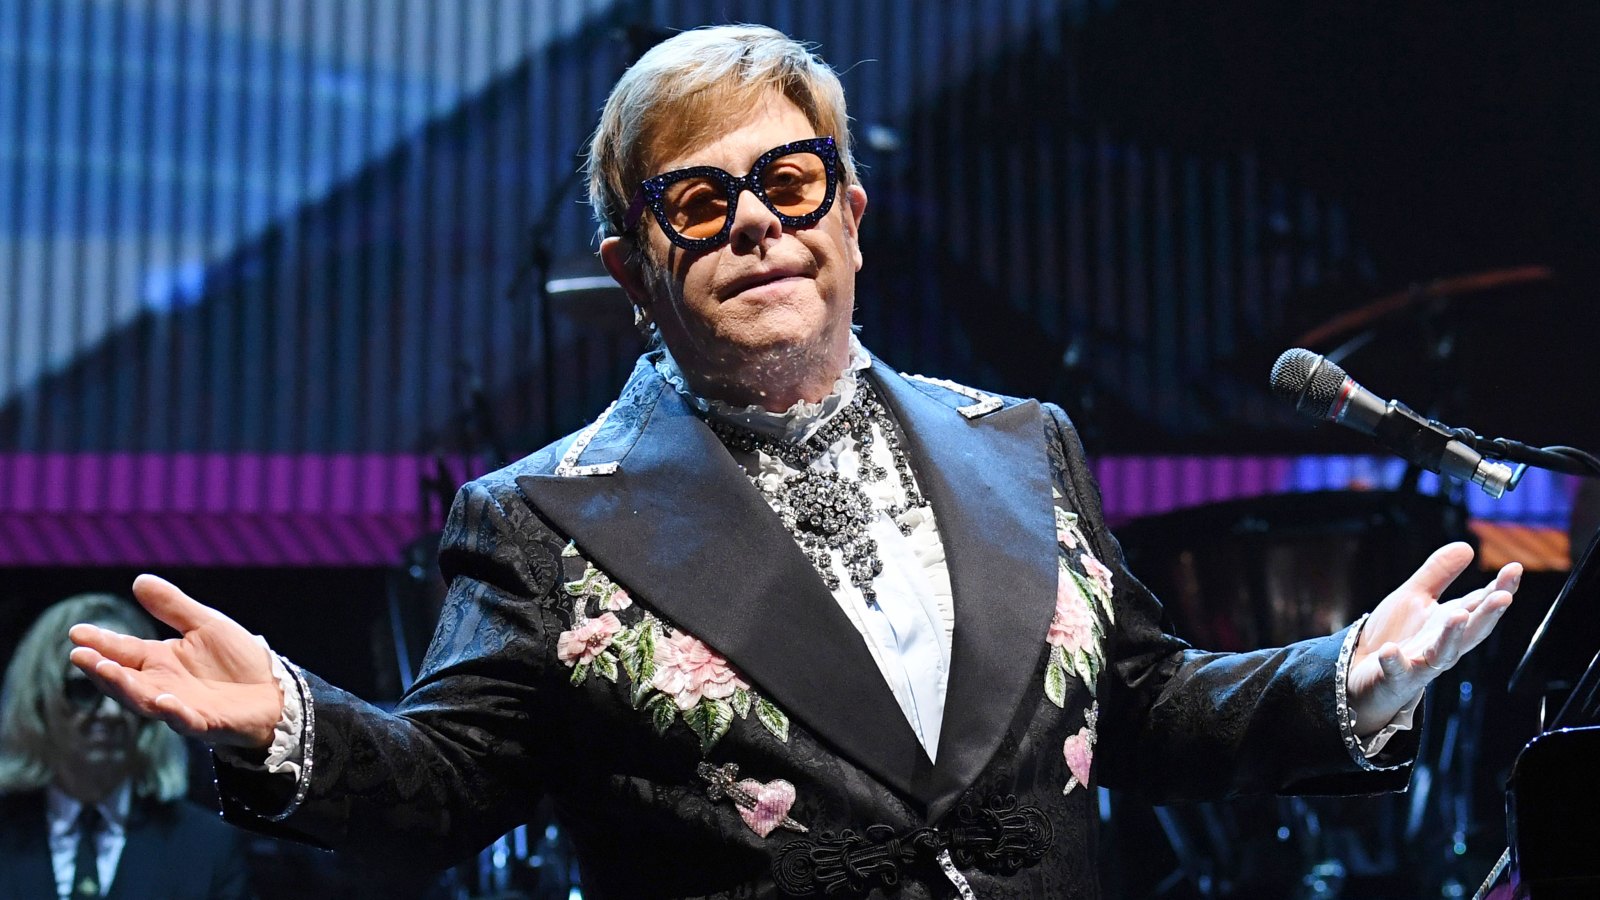 Elton John Fans Are Livid He Canceled a Concert 30 Minutes After Showtime Due to an Ear Infection